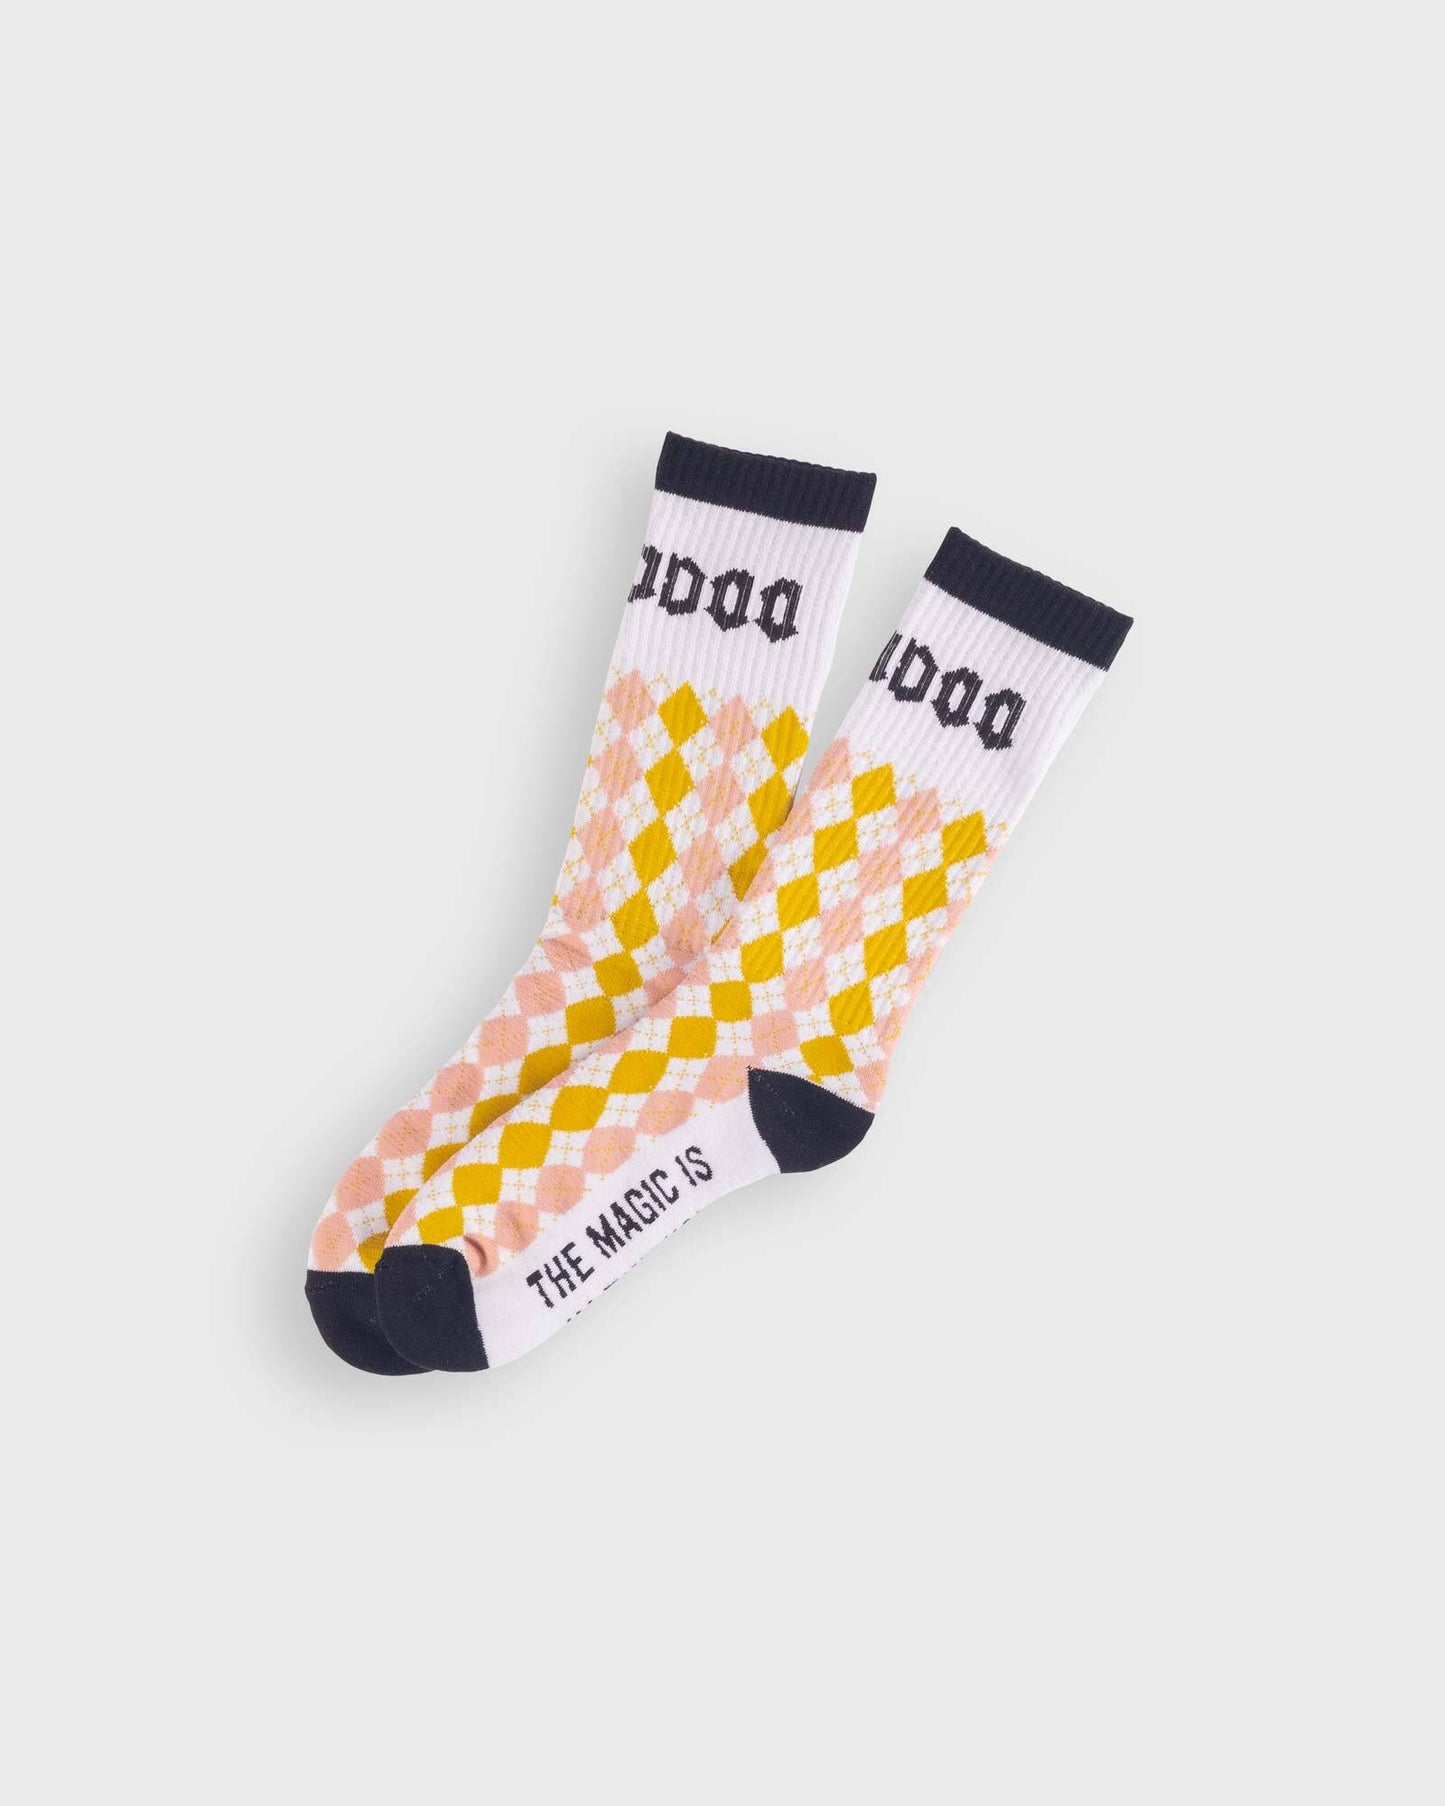 white voodoo socks with gold, pink and black graphics